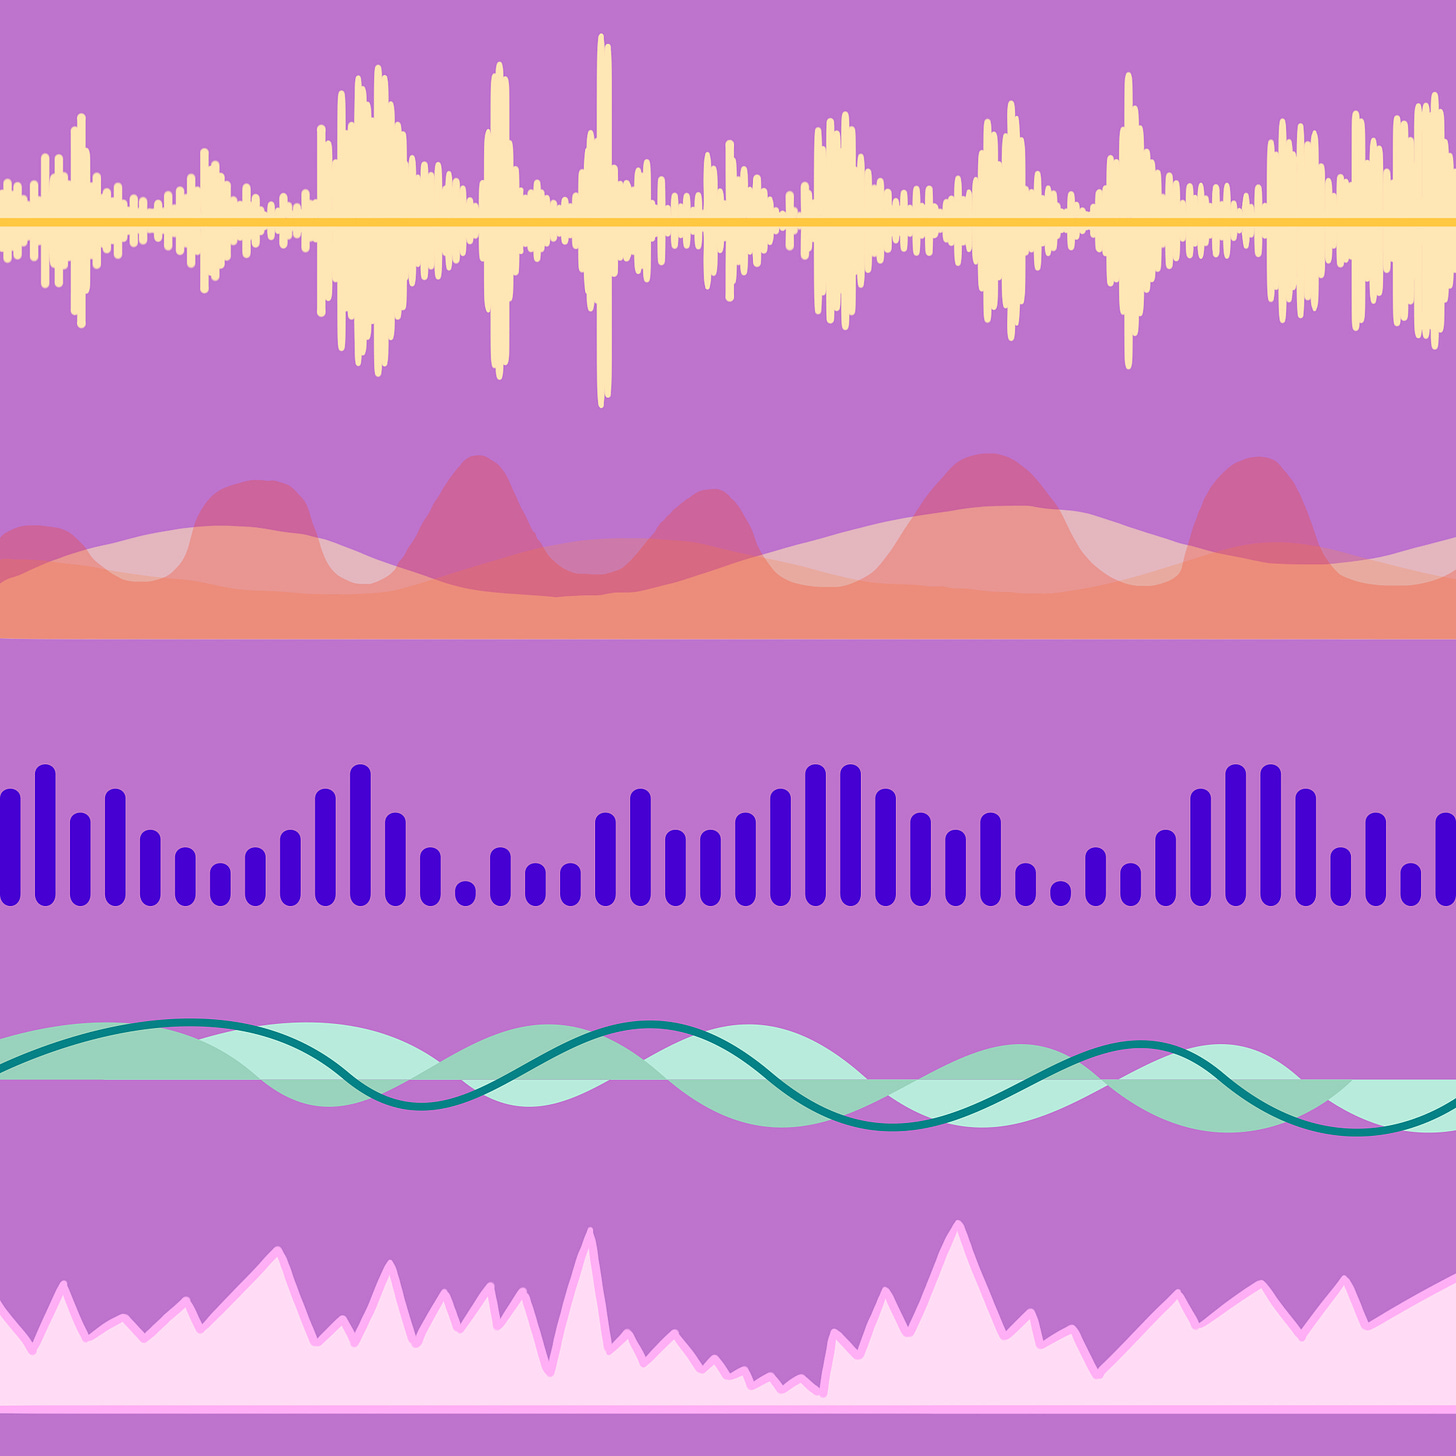 Image description: This illustration shows the various ranges of vocal frequency across different types of technology. The frequencies look like waves in orange, yellow, green, and blue lines across a violet background. 